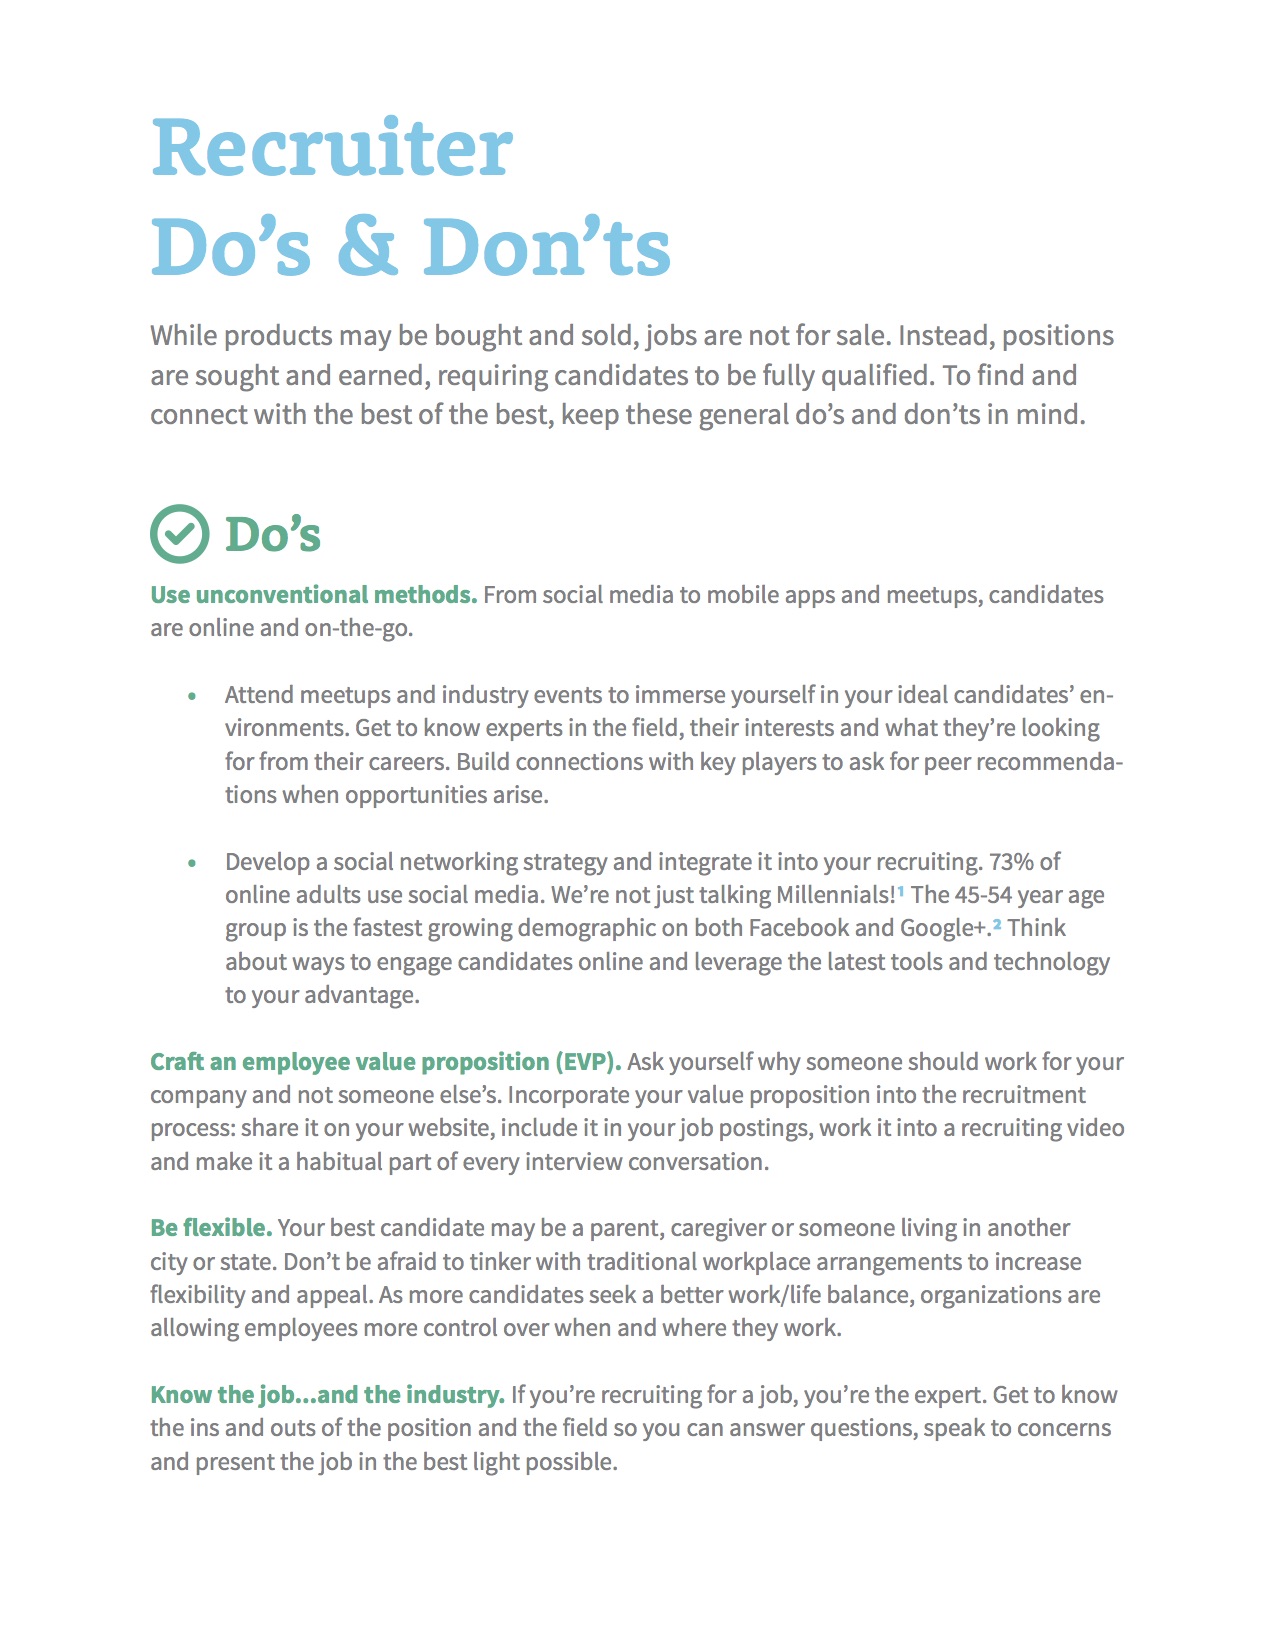 Oppify Recruiter Do's and Don'ts Front Page